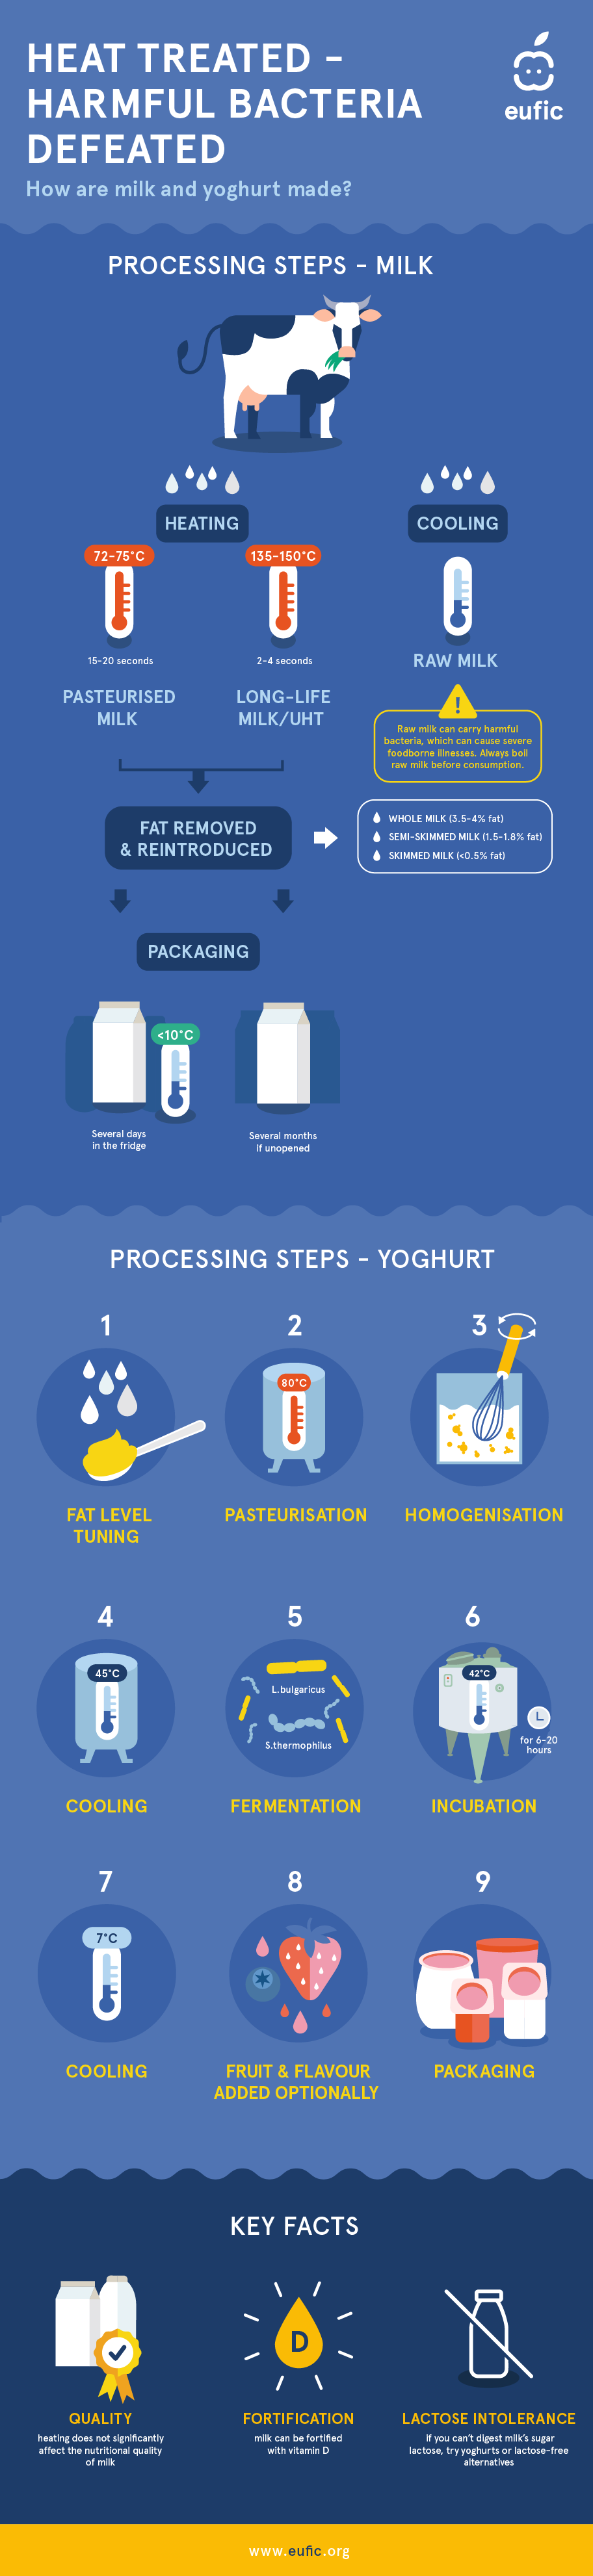 The processing steps of milk and yoghurt